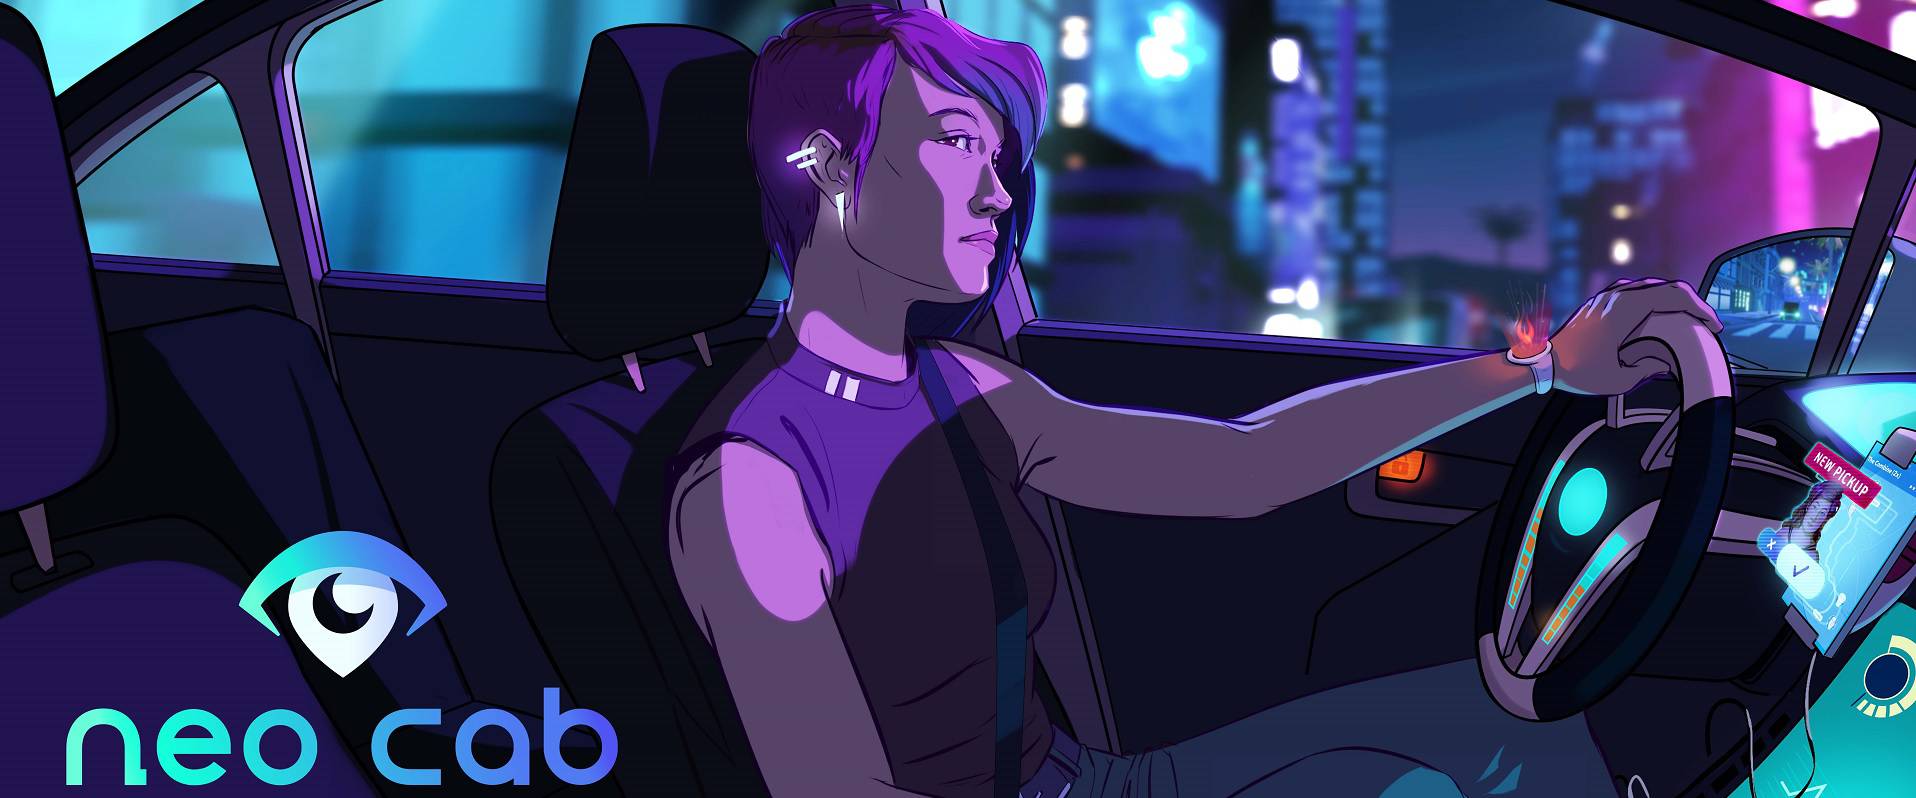 Neo Cab Receives a Release Date on Nintendo Switch